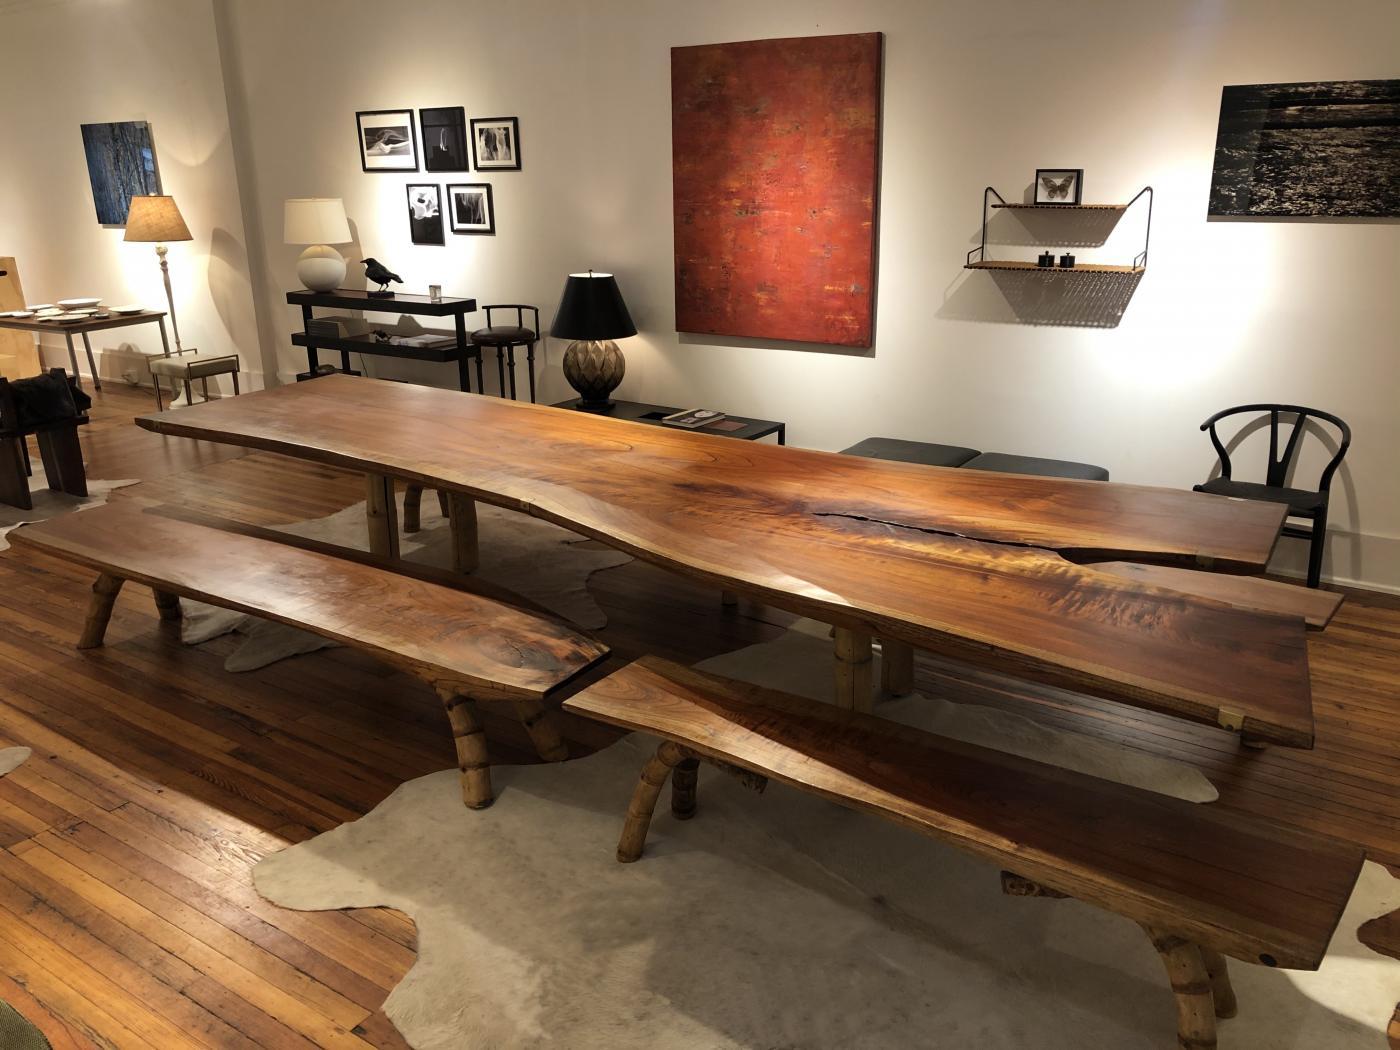 Exceptionally large table and benches crafted out of a single slab of cedar with cast bronze hardware details by the columbian architect and designer Marcelo Villegas.
The legs of the table are ‘guadua’ bamboo and the legs of the benches are the